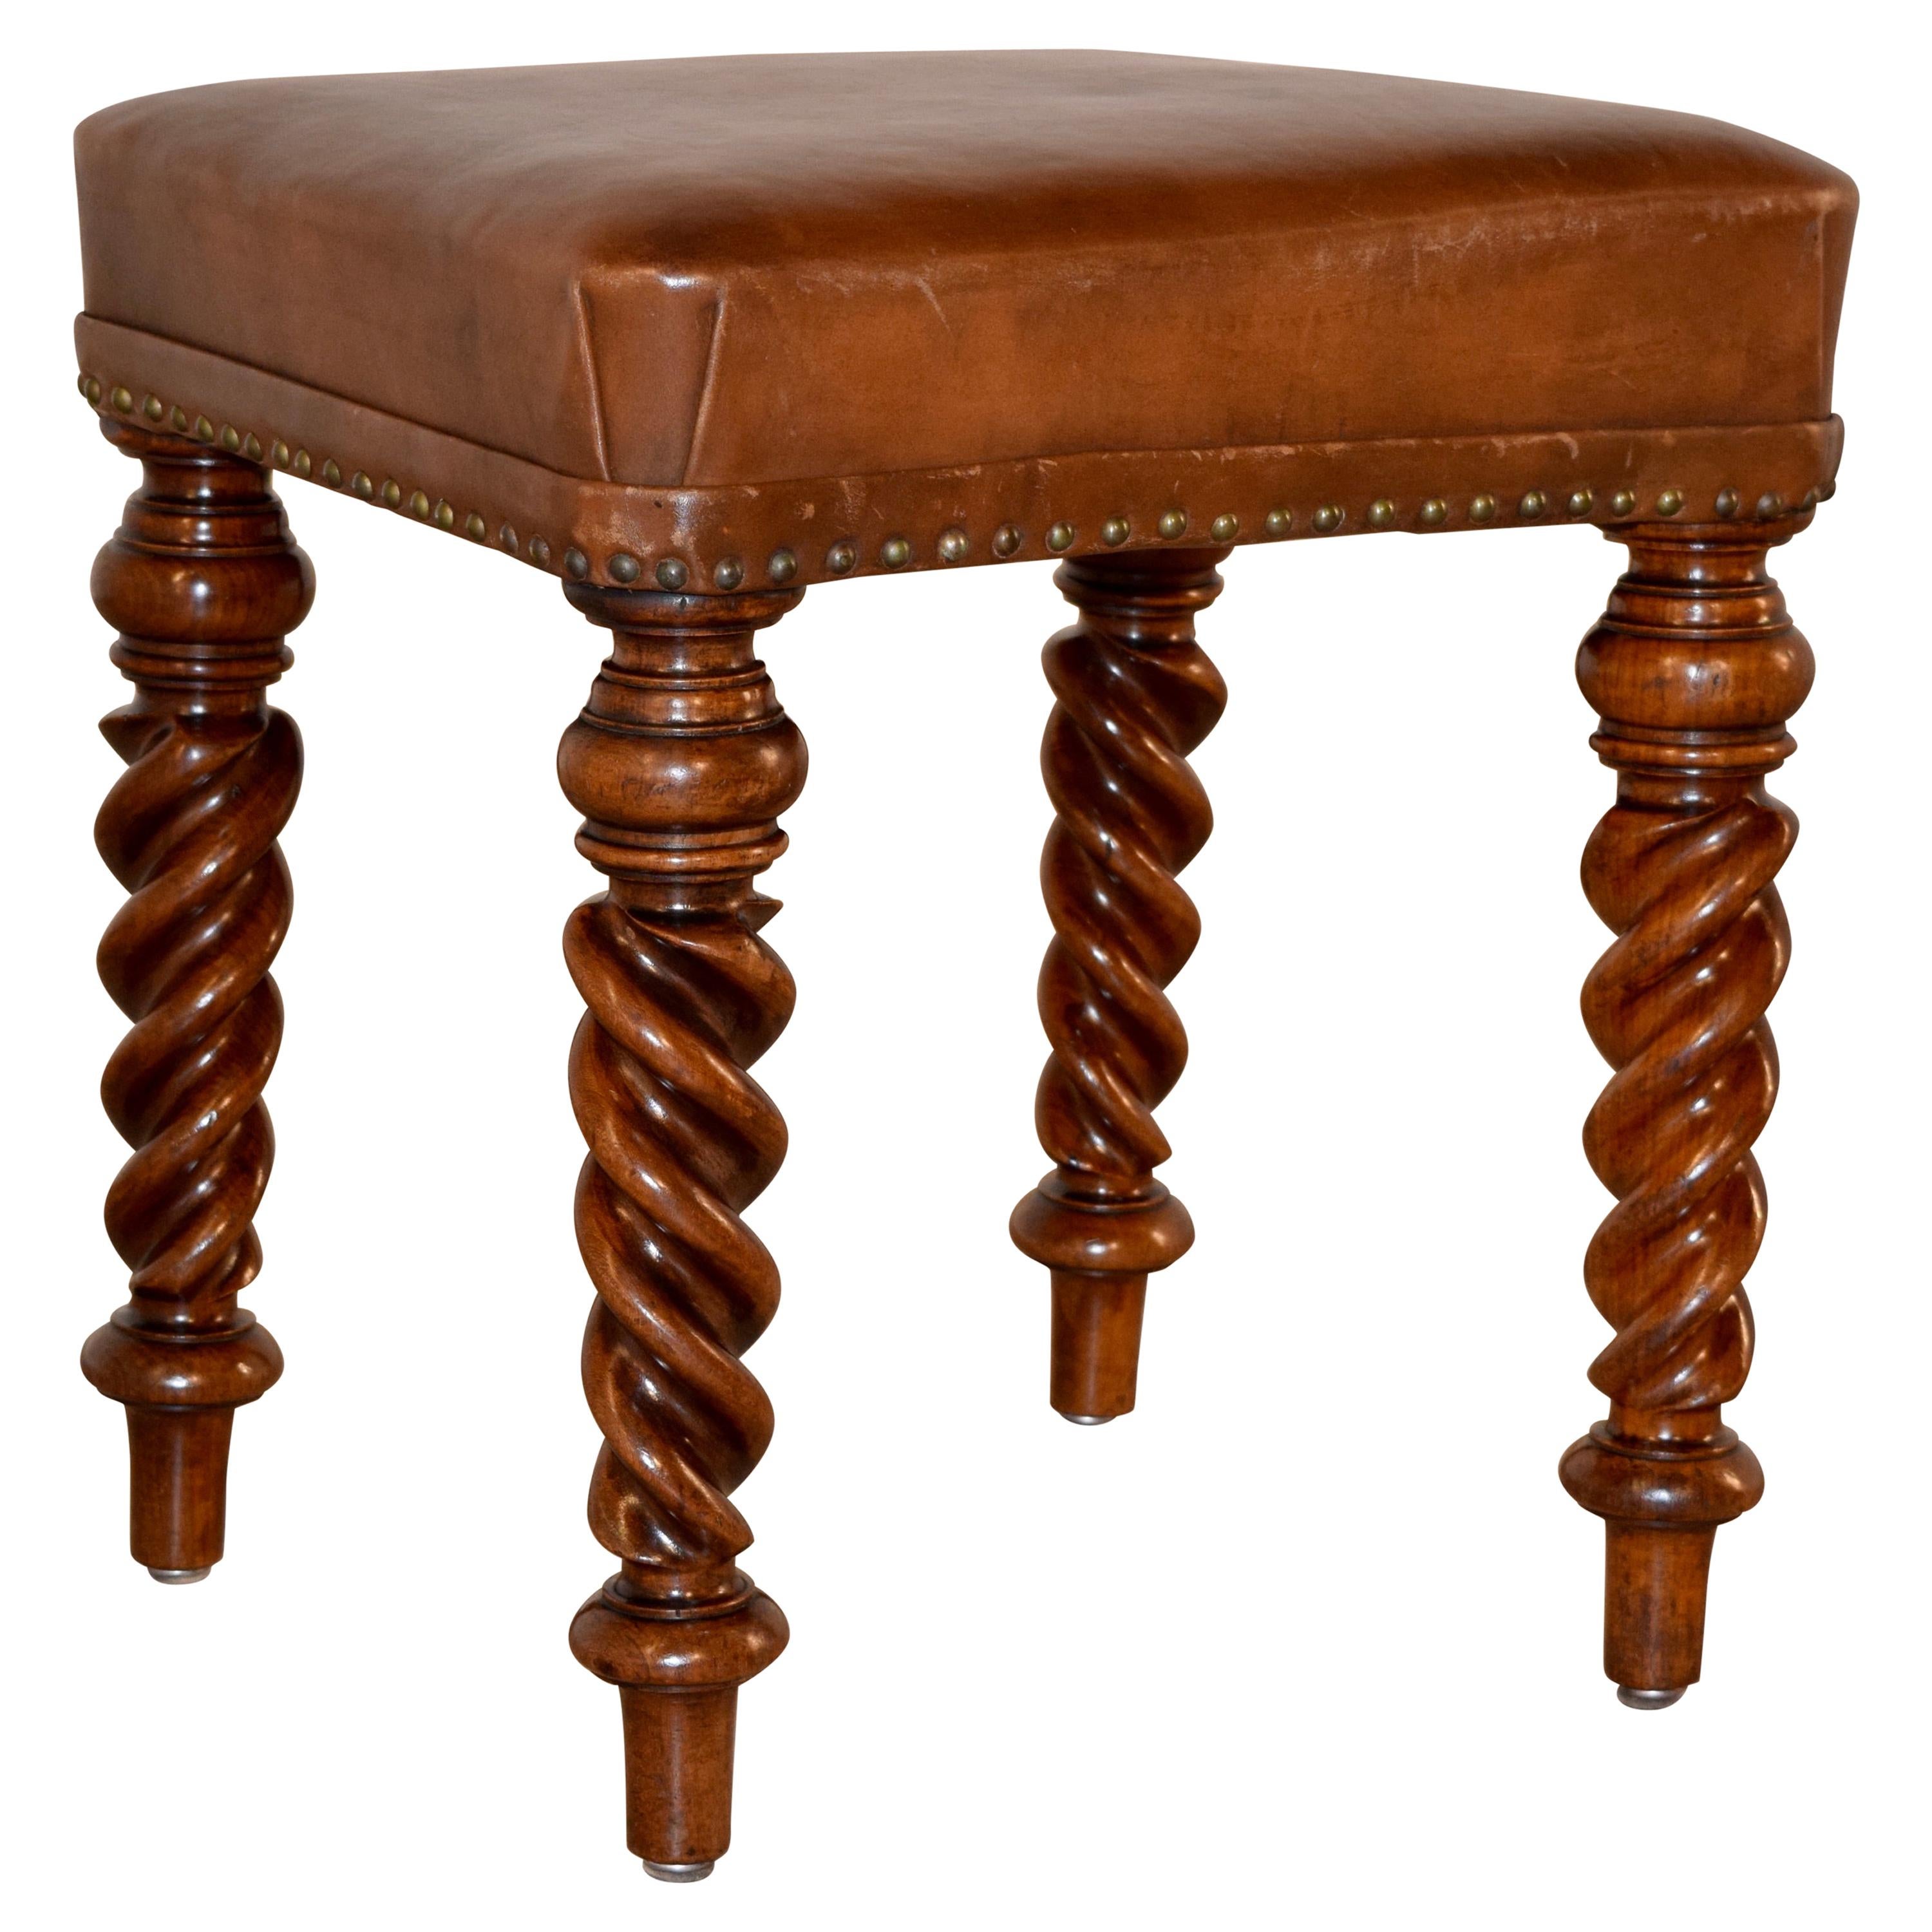 19th Century English Mahogany Stool with Leather Top